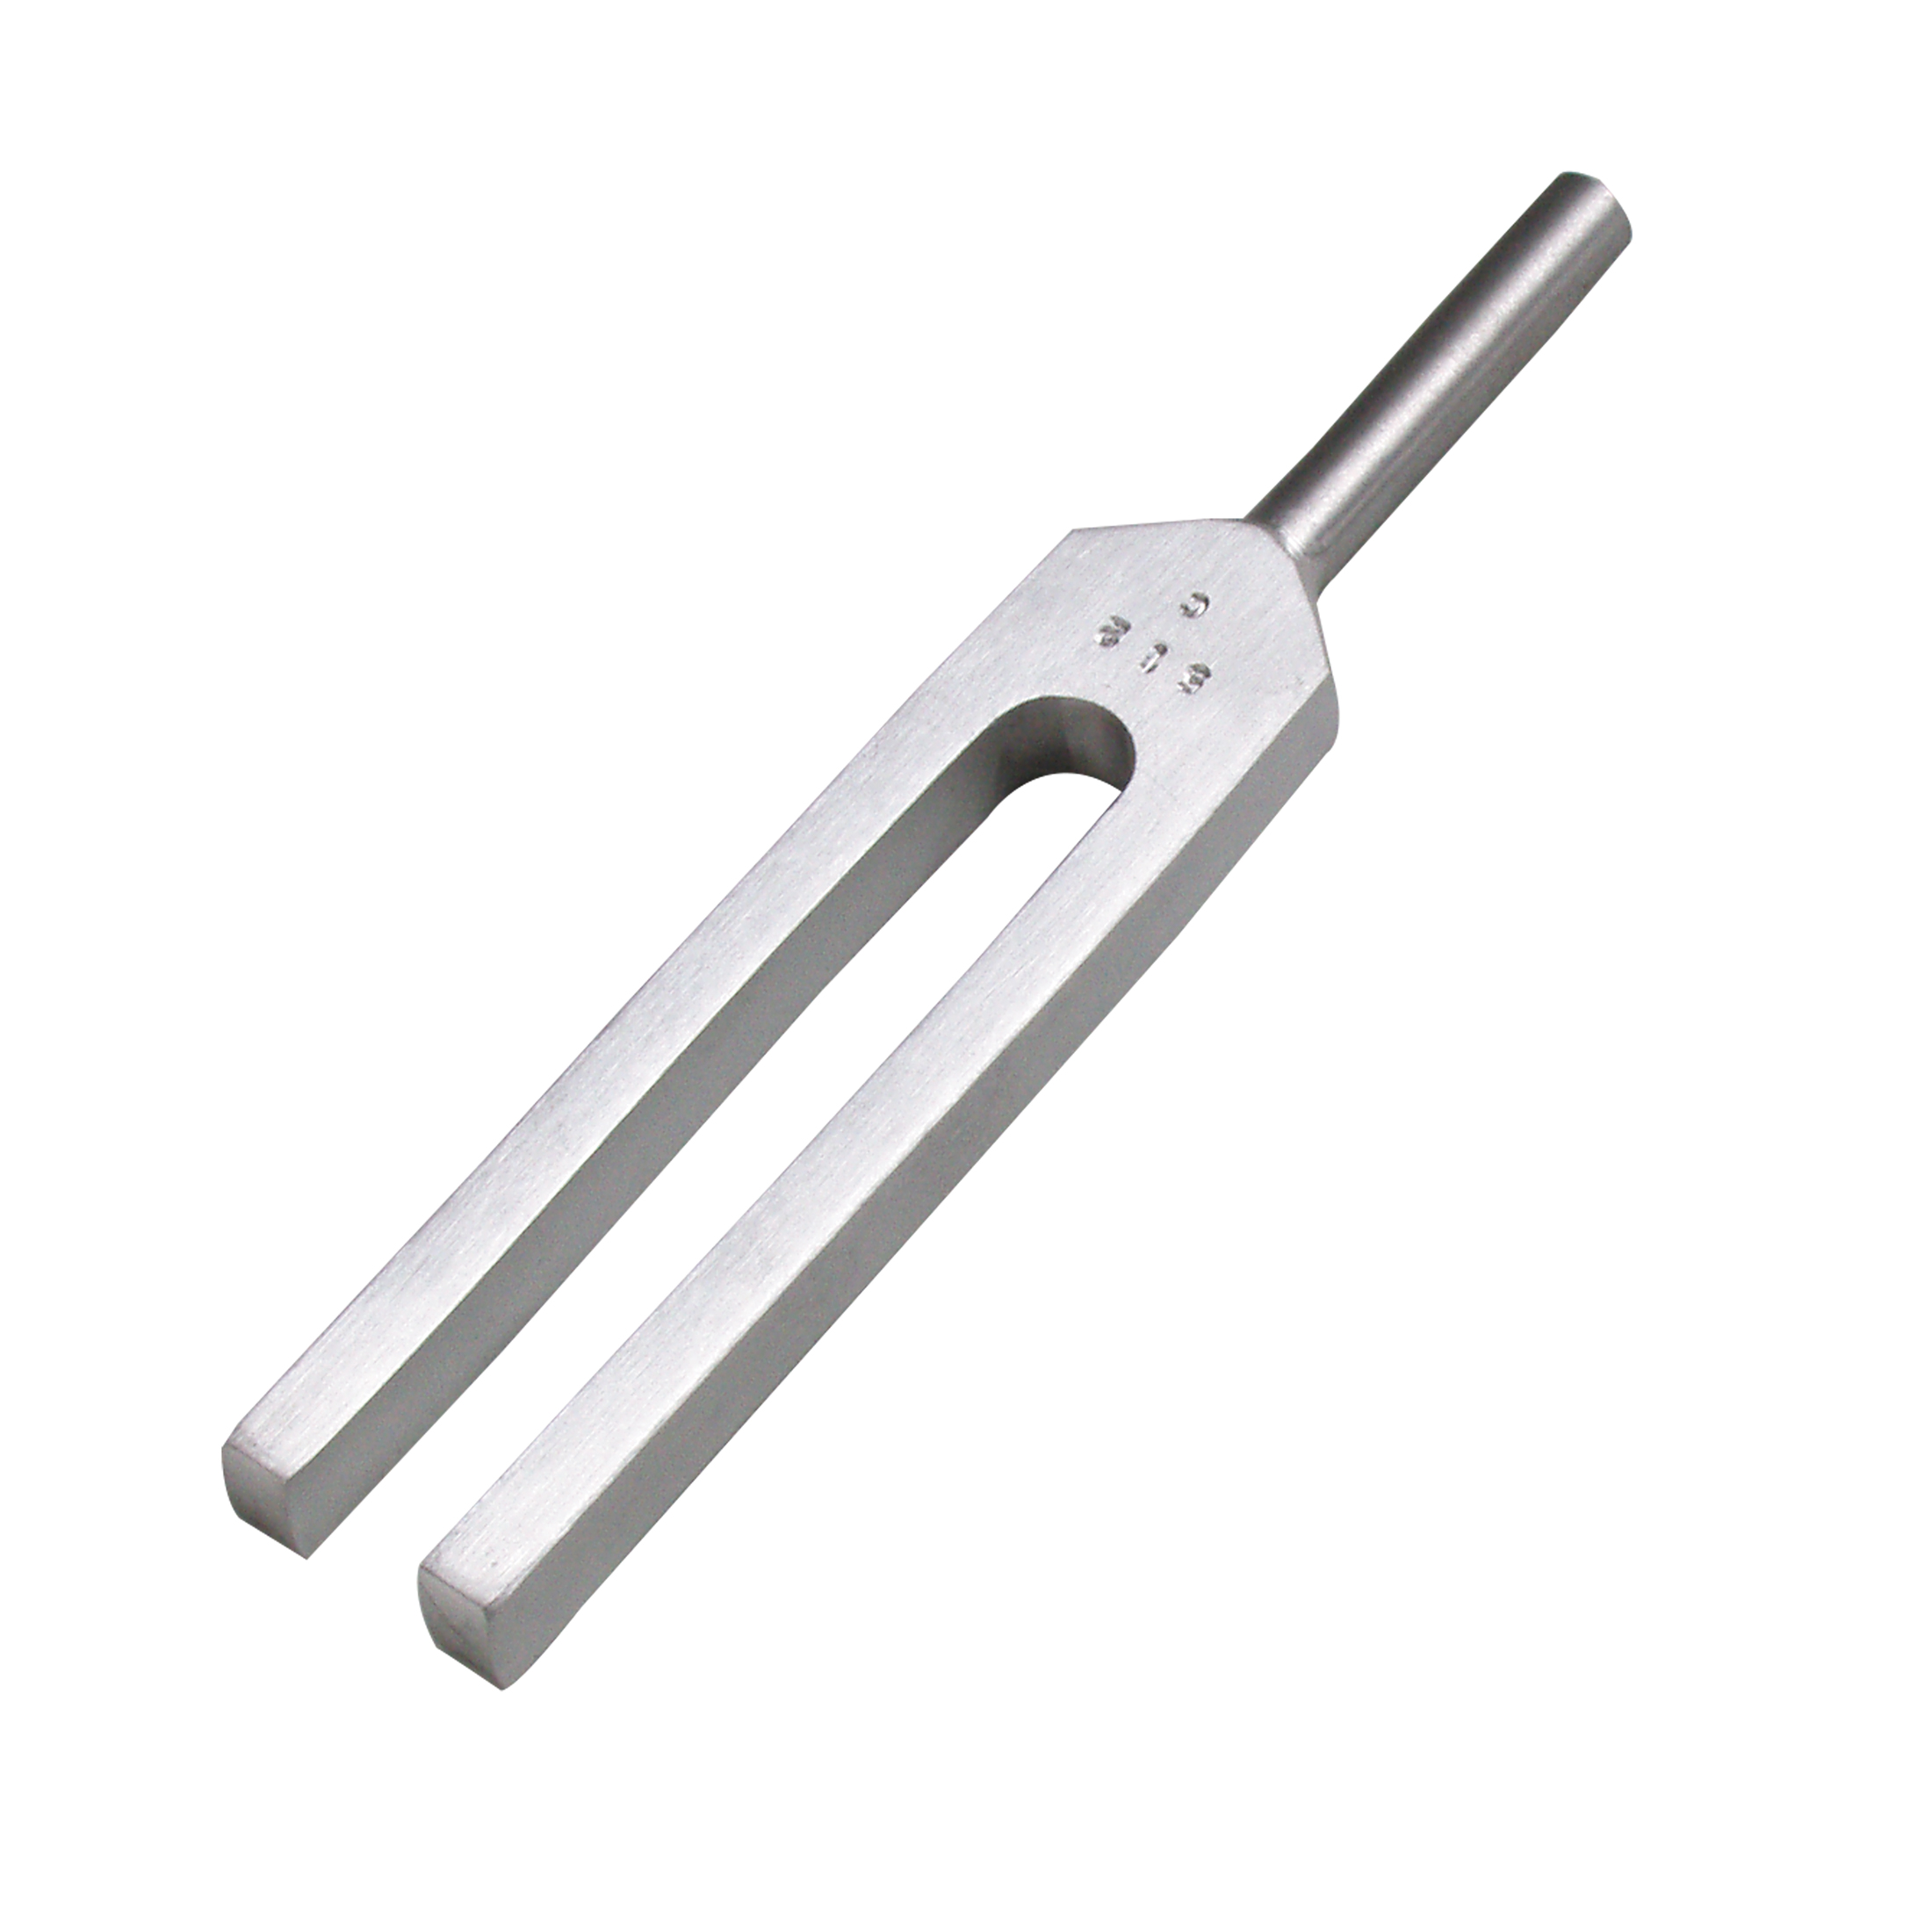 Tuning Forks Products, Supplies and Equipment